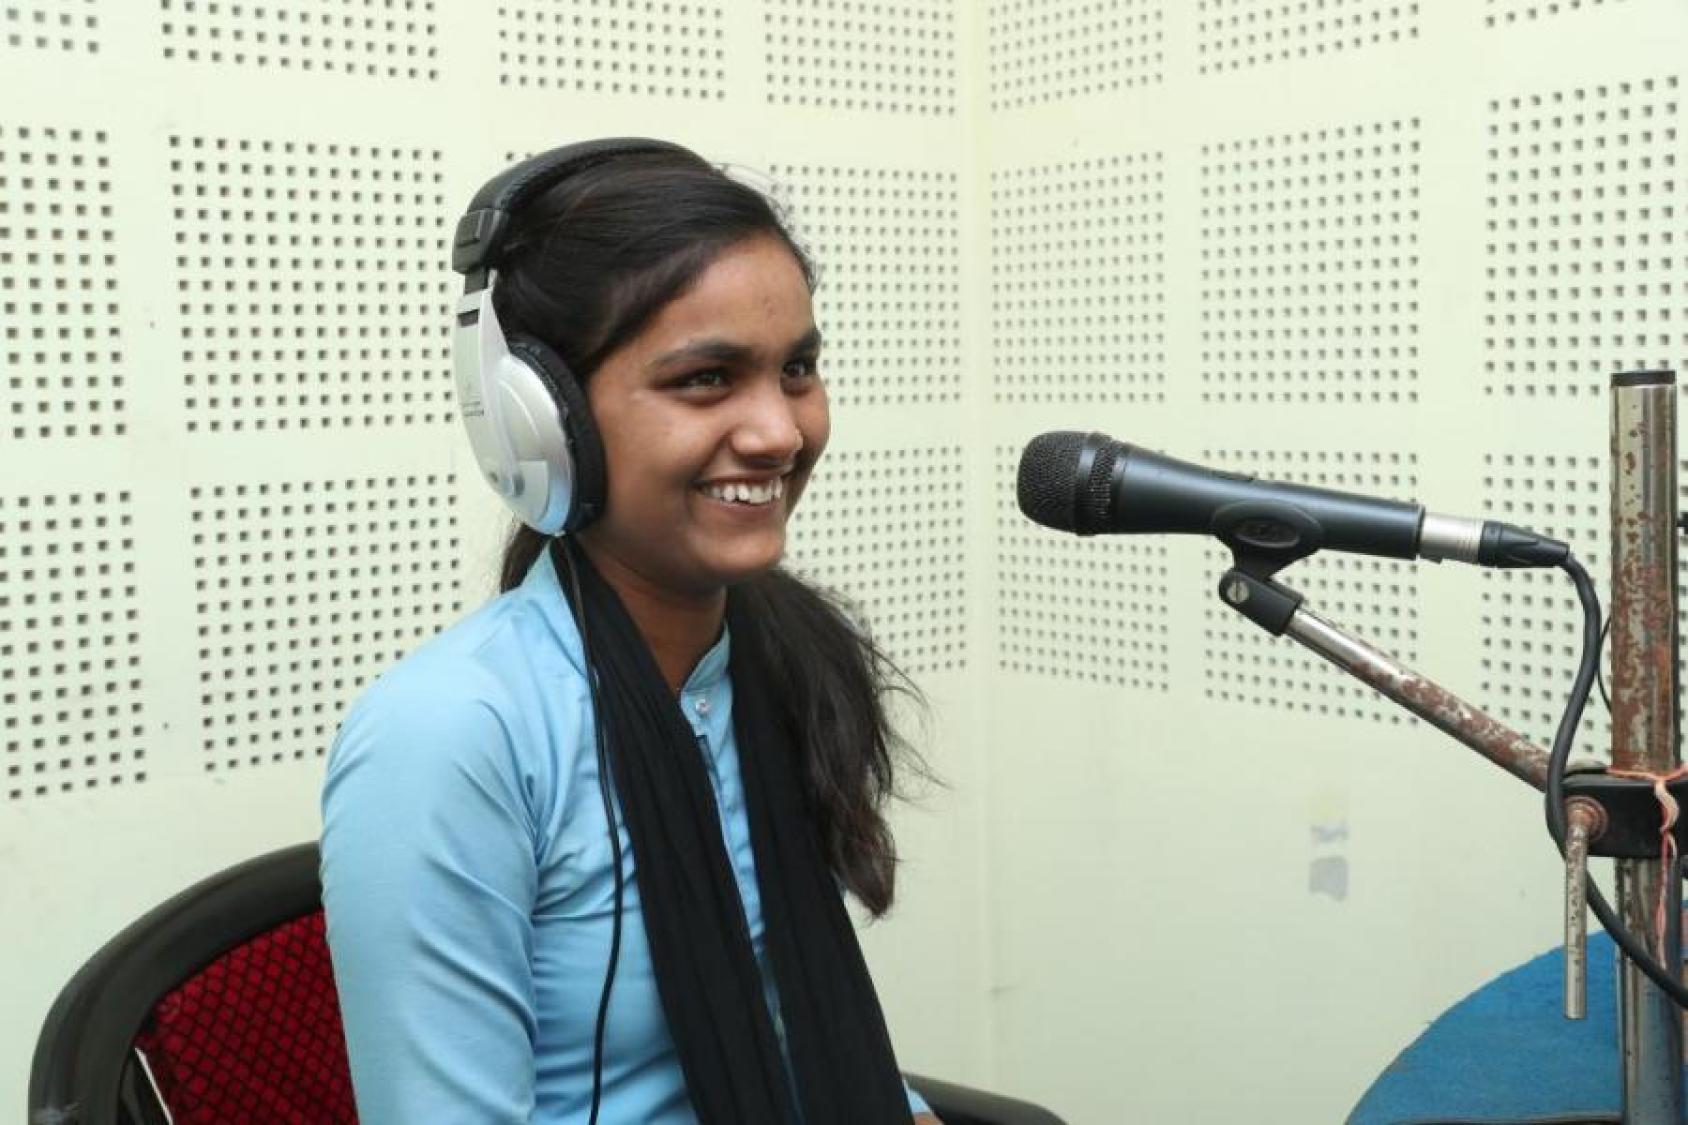 A girl in a studio has headphones on and smiles at the microphone near her mouth.